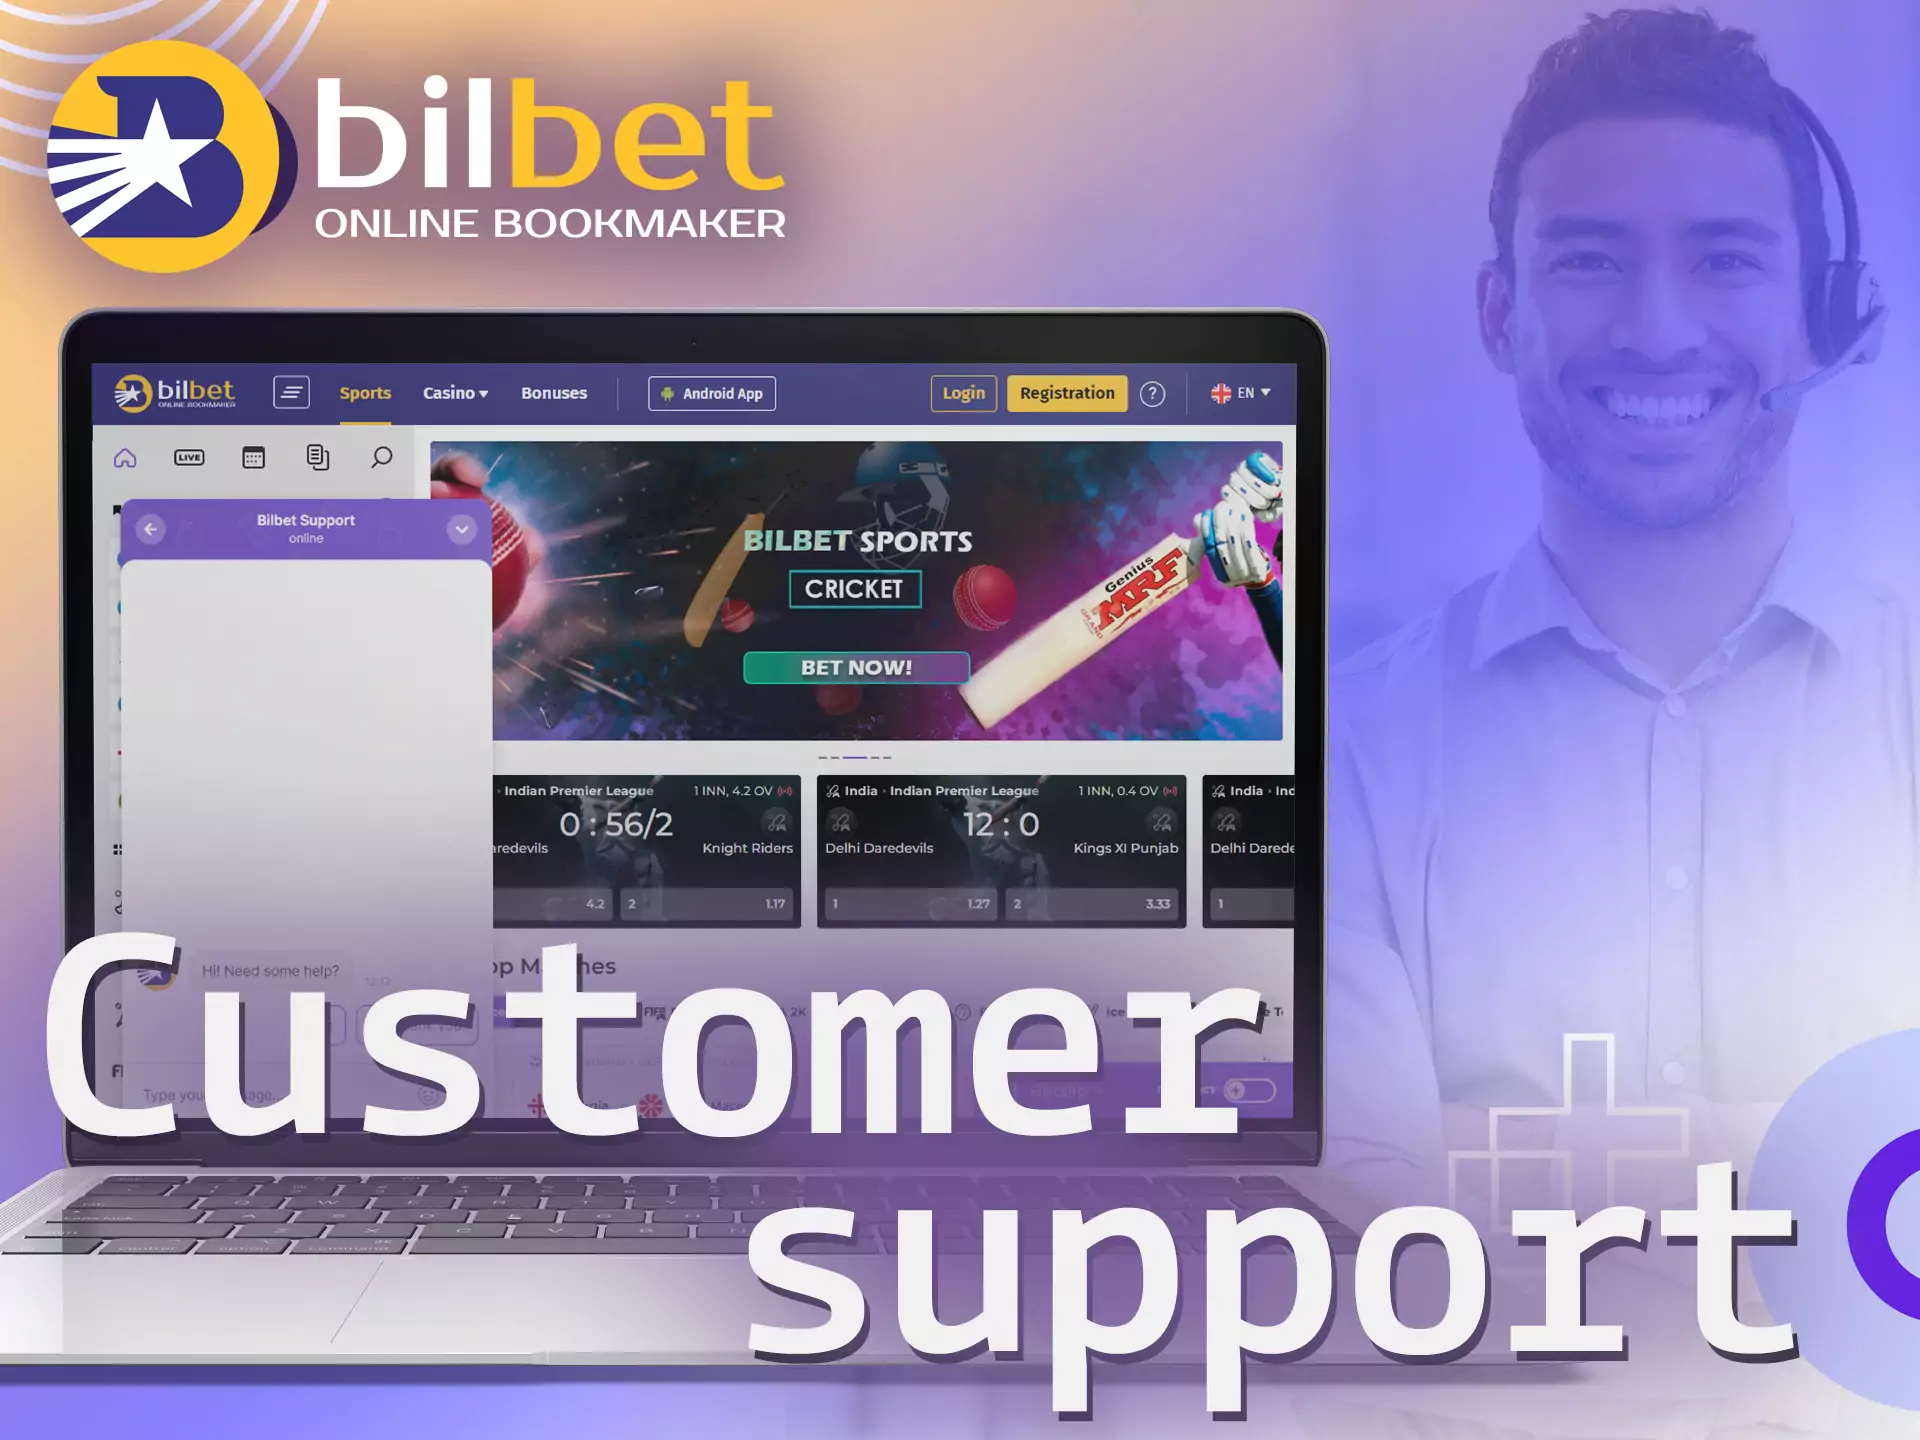 The Bilbet customer service is always ready to help.